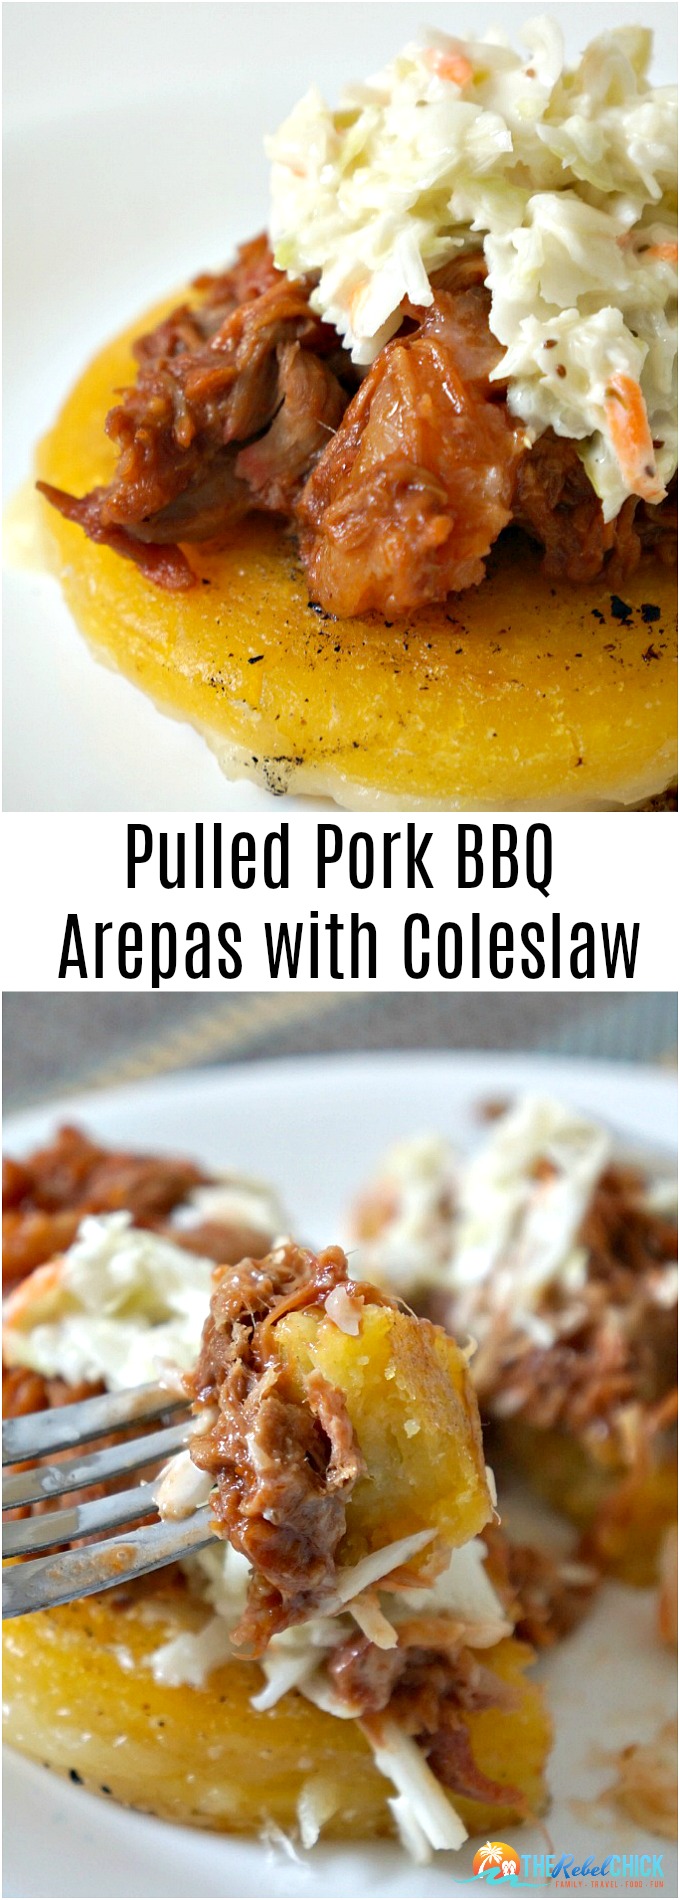 Pulled Pork BBQ Arepas with Coleslaw Recipe